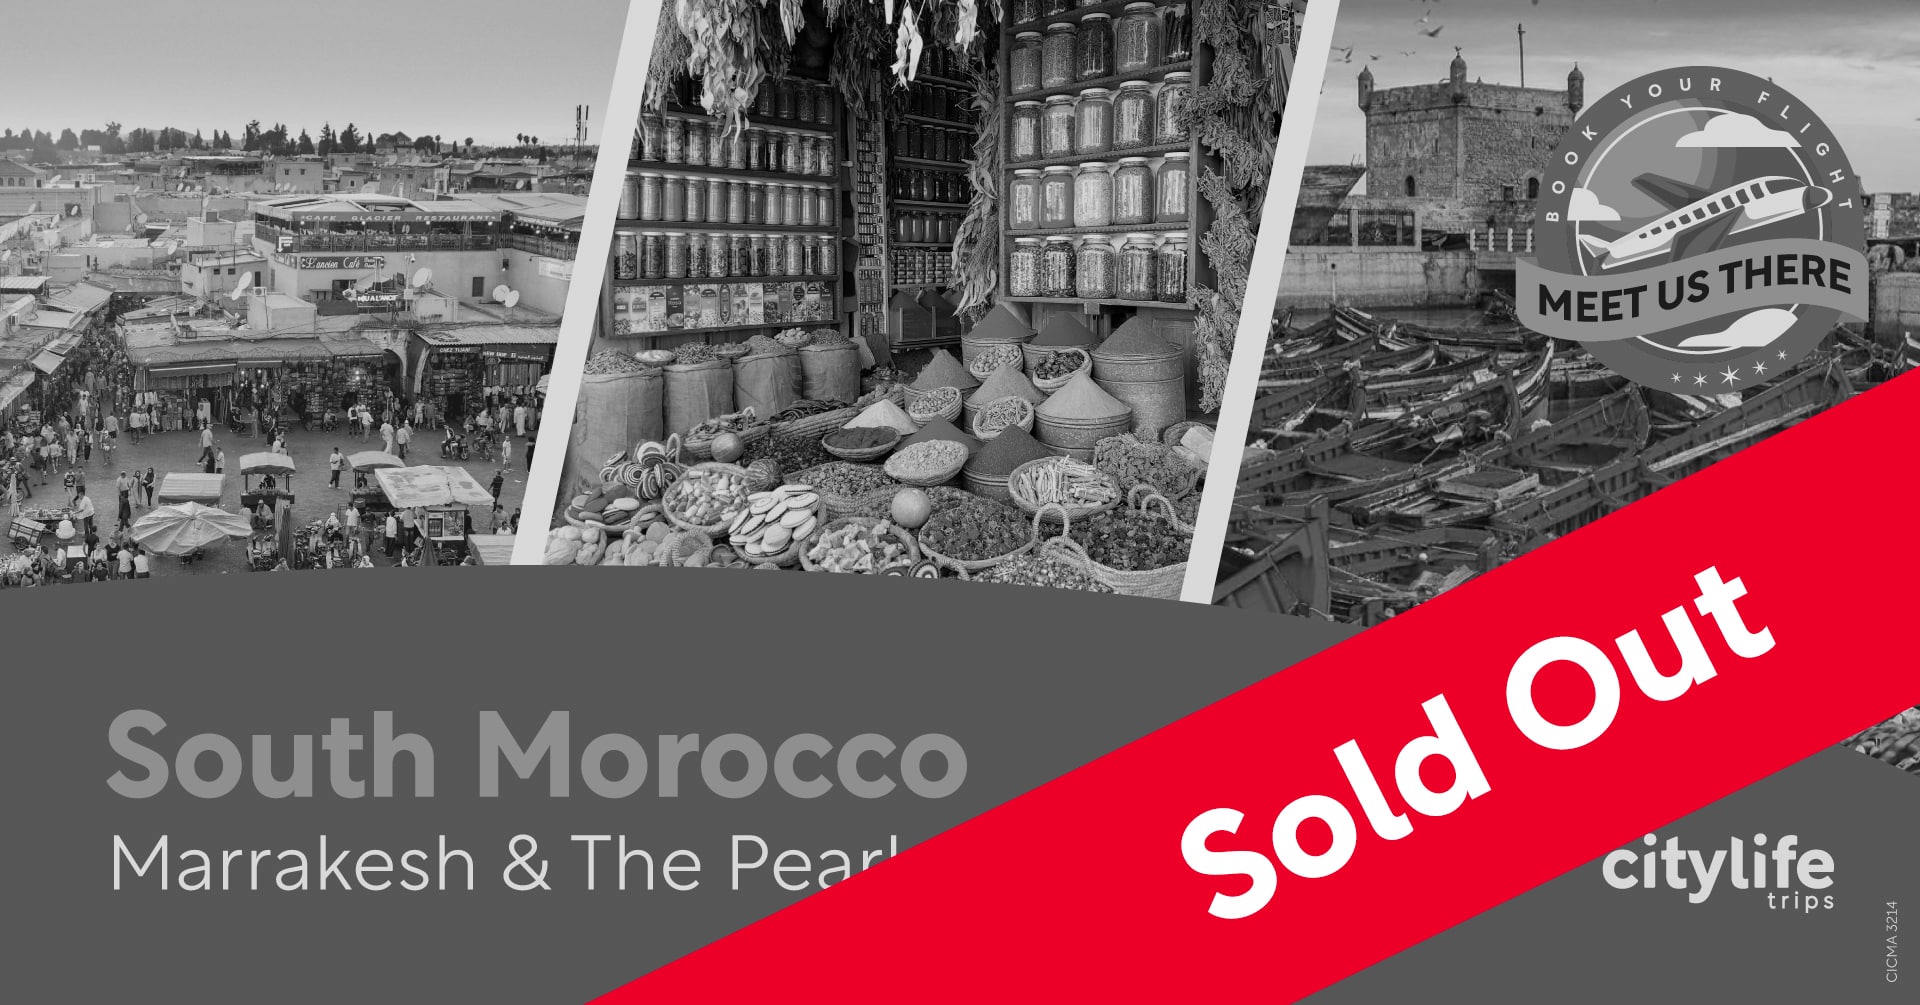 Sold-out-south-morocco-fb-event